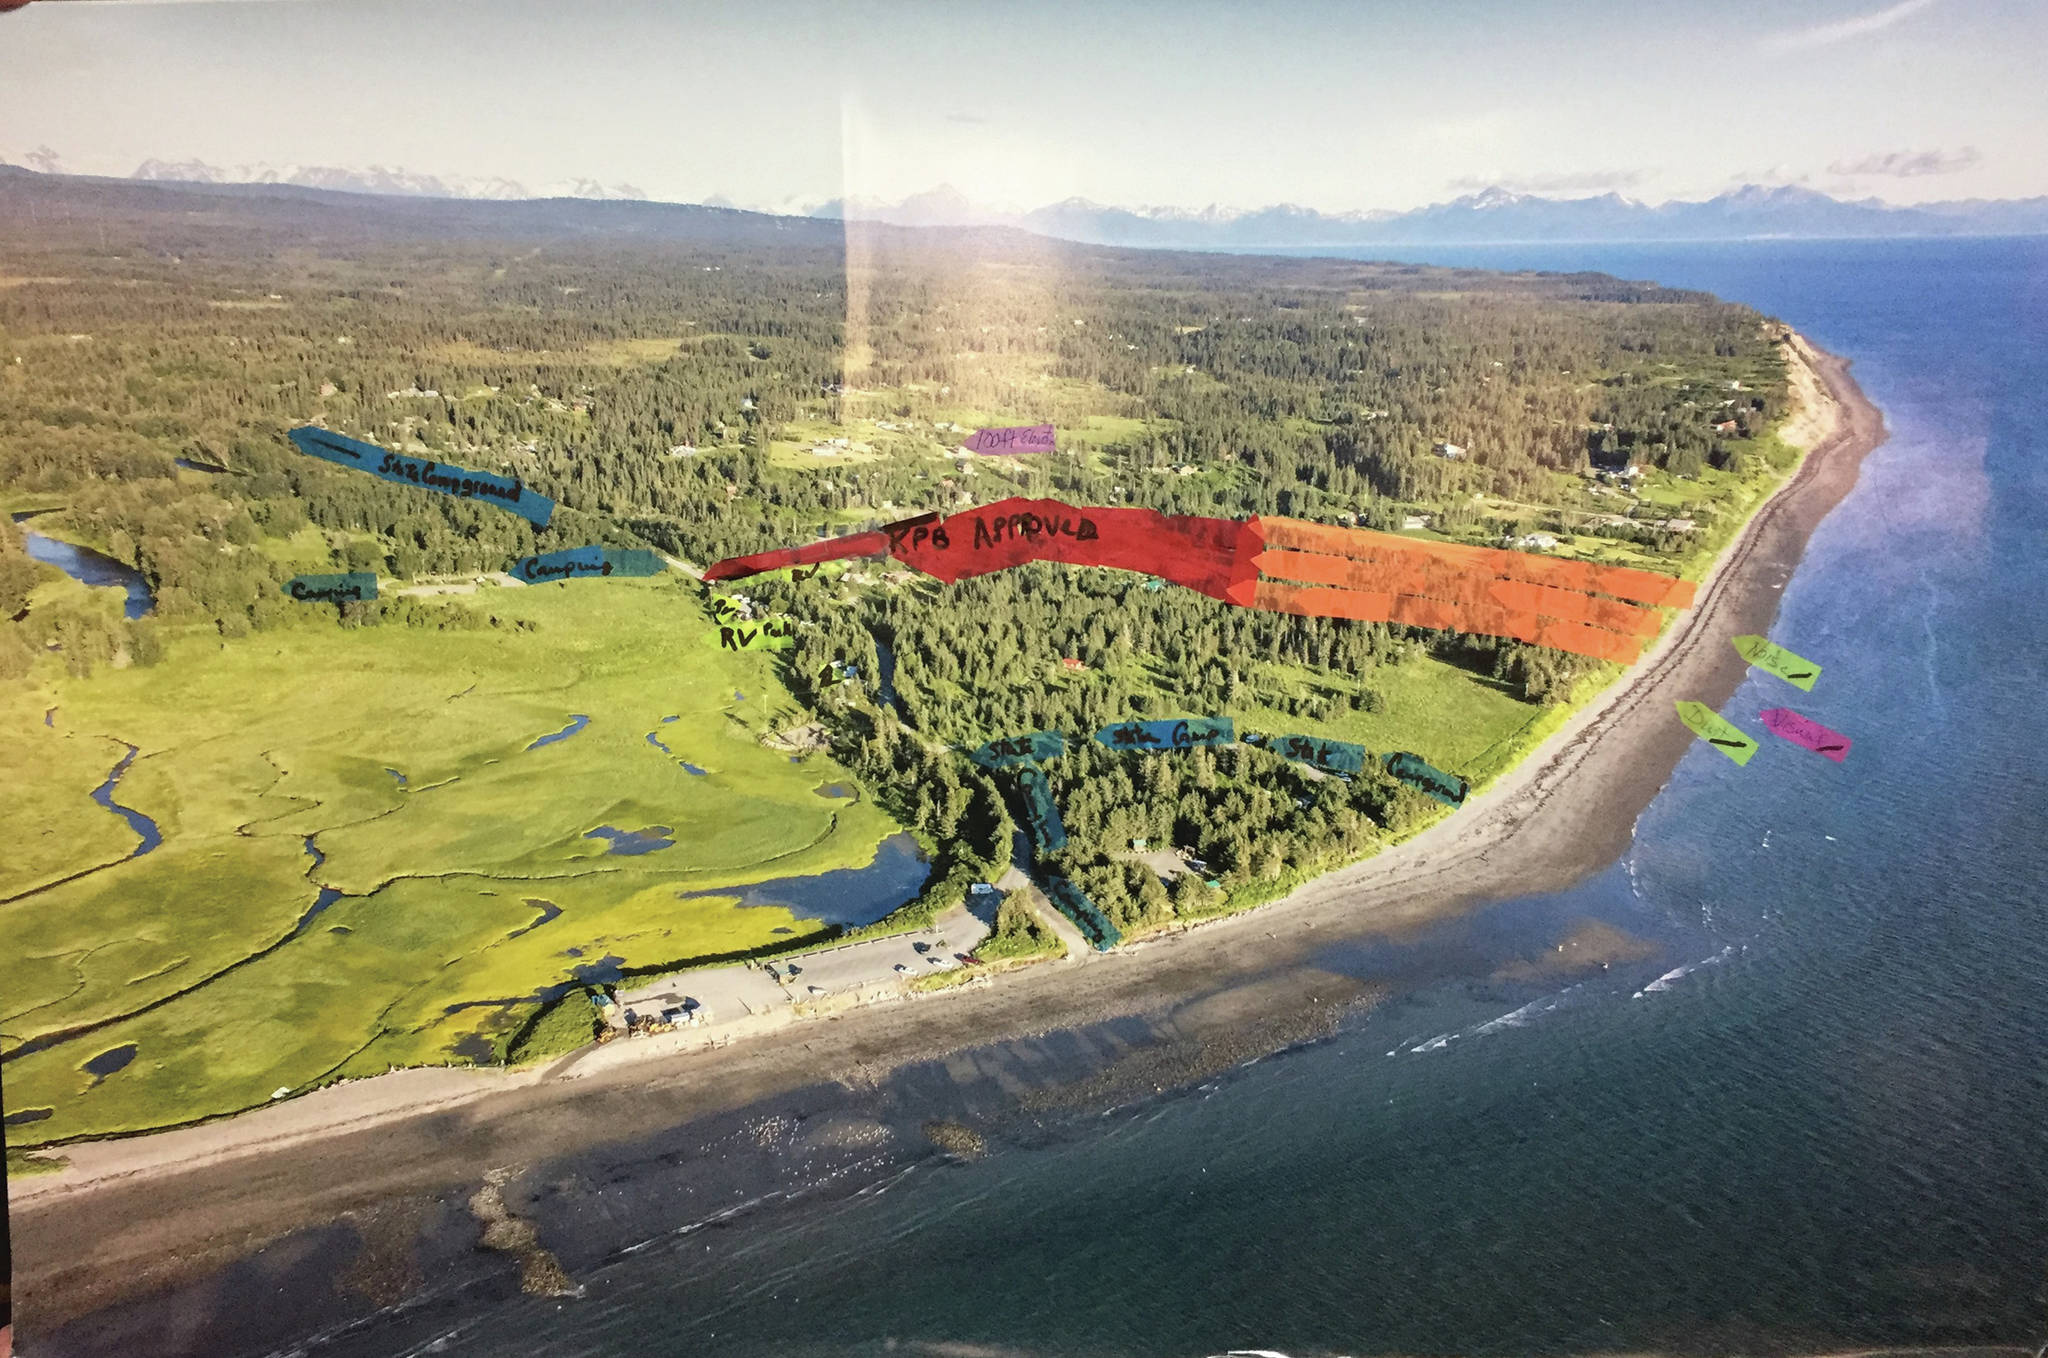 A diagram presented by Teresa Jacobson Gregory illustrates the proposed extension of the Trimbles’ gravel pit and the impact it may have on the surrounding state recreation area. The red markers indicate the current gravel mining area, and the orange represents the area the extension may allow for mining if approved. Kenai Peninsula Borough Planning Department liaison Bruce Wall said there would be a 100-feet setback from the ocean. (Image courtesy Teresa Jacobson Gregory)